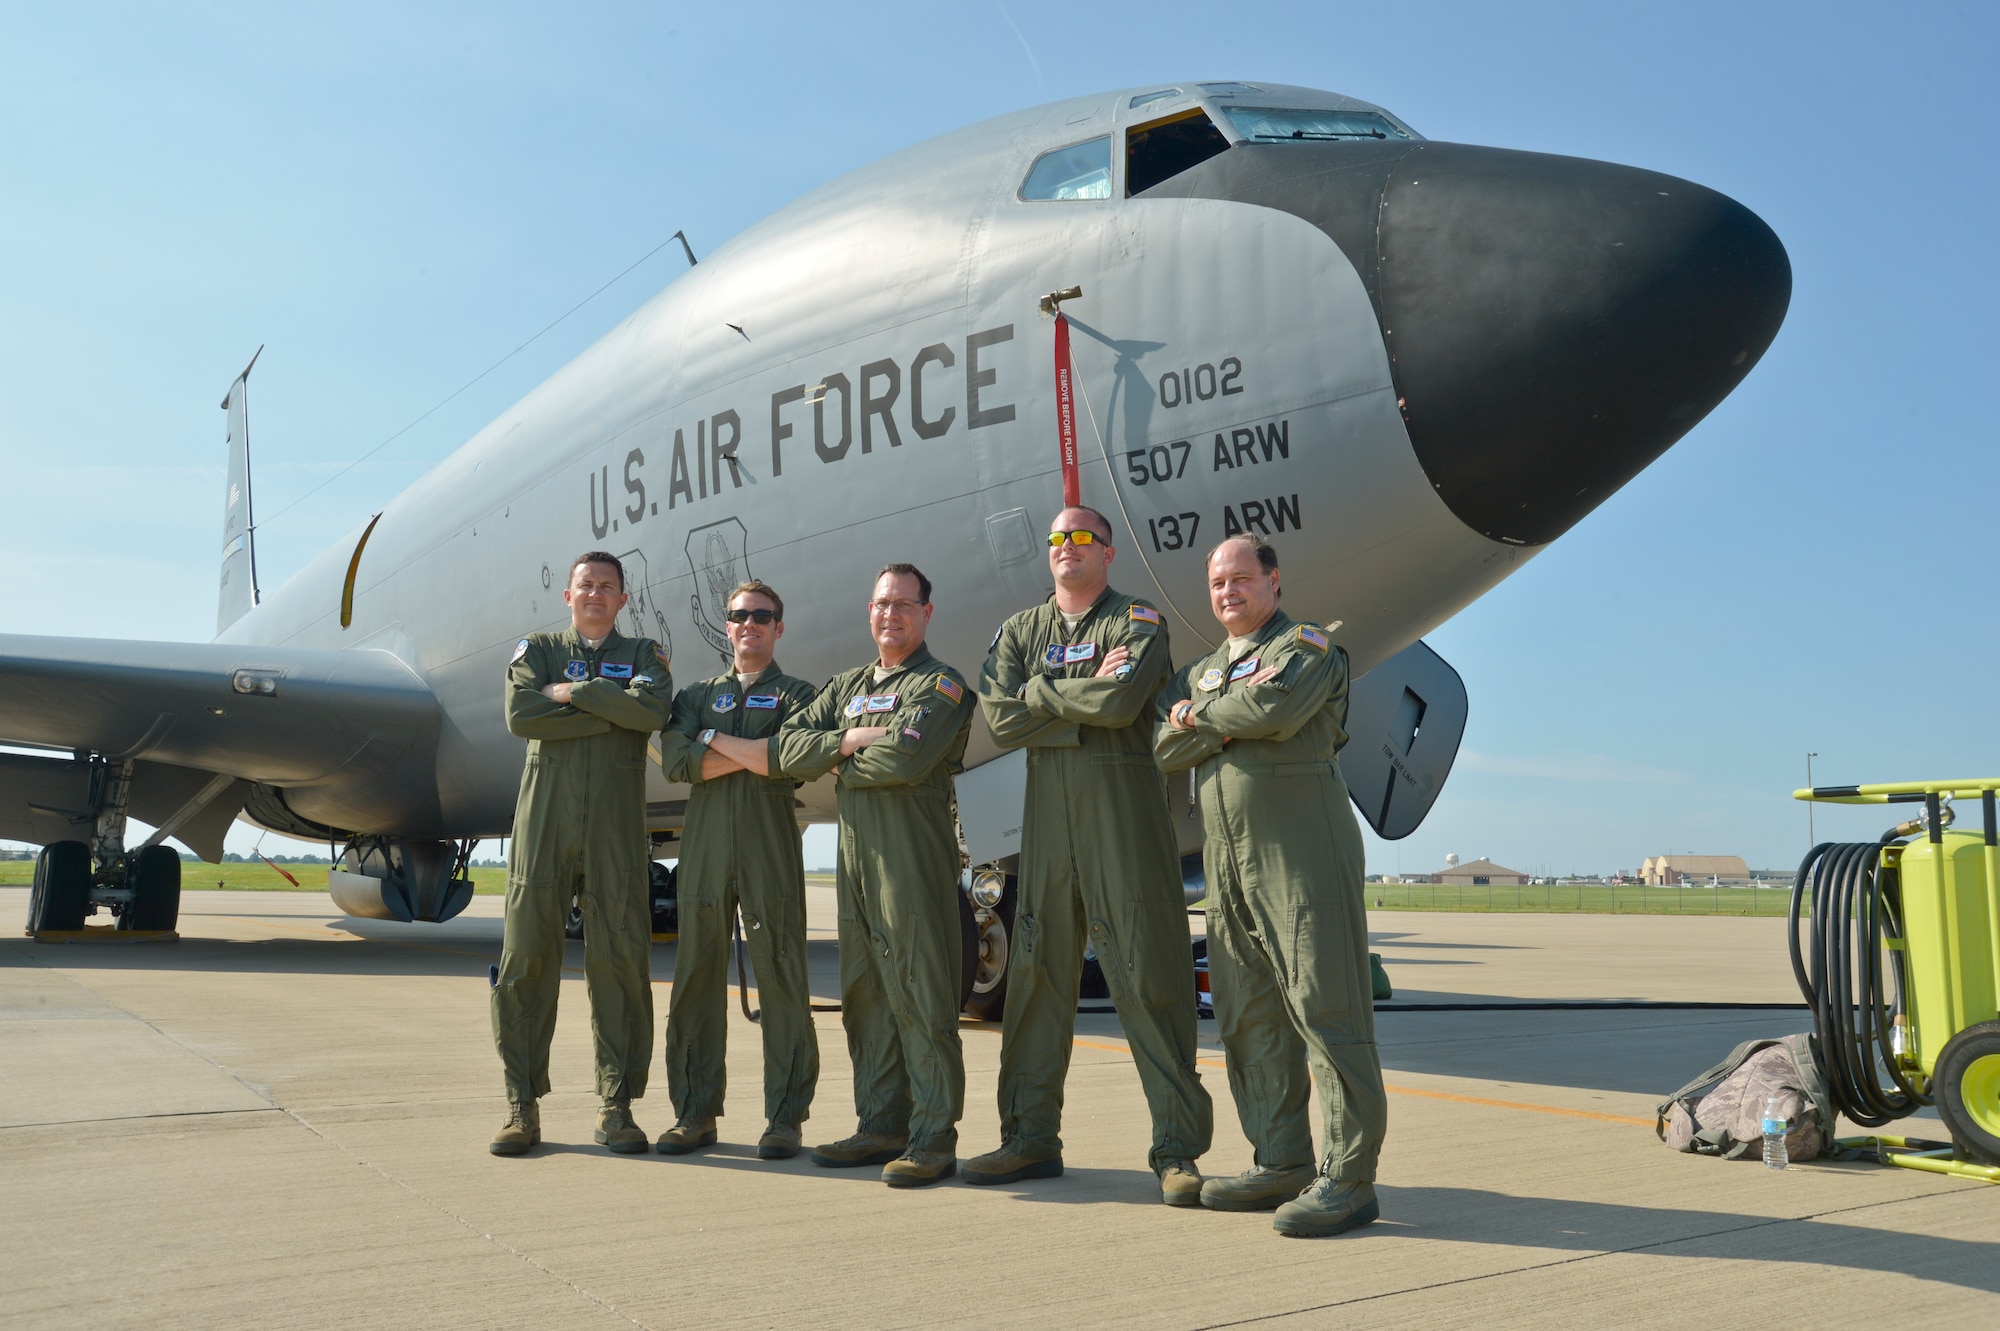 Aircrew from the 185th Air Refueling Squadron performed the final 137th Air Refueling Wing KC-135 Stratotanker mission June 30, 2015. The final crew consisted of (from left to right) Master Sgt. Ty Taylor, Capt. Thomas Bryceland, Lt. Col. Mark Hole, Staff Sgt. Samuel Wirstrom, and 137th Medical Group Flight Surgeon Lt. Col. Tim Cathey. (U.S. Air National Guard photo by Tech Sgt. Caroline Essex/Released)